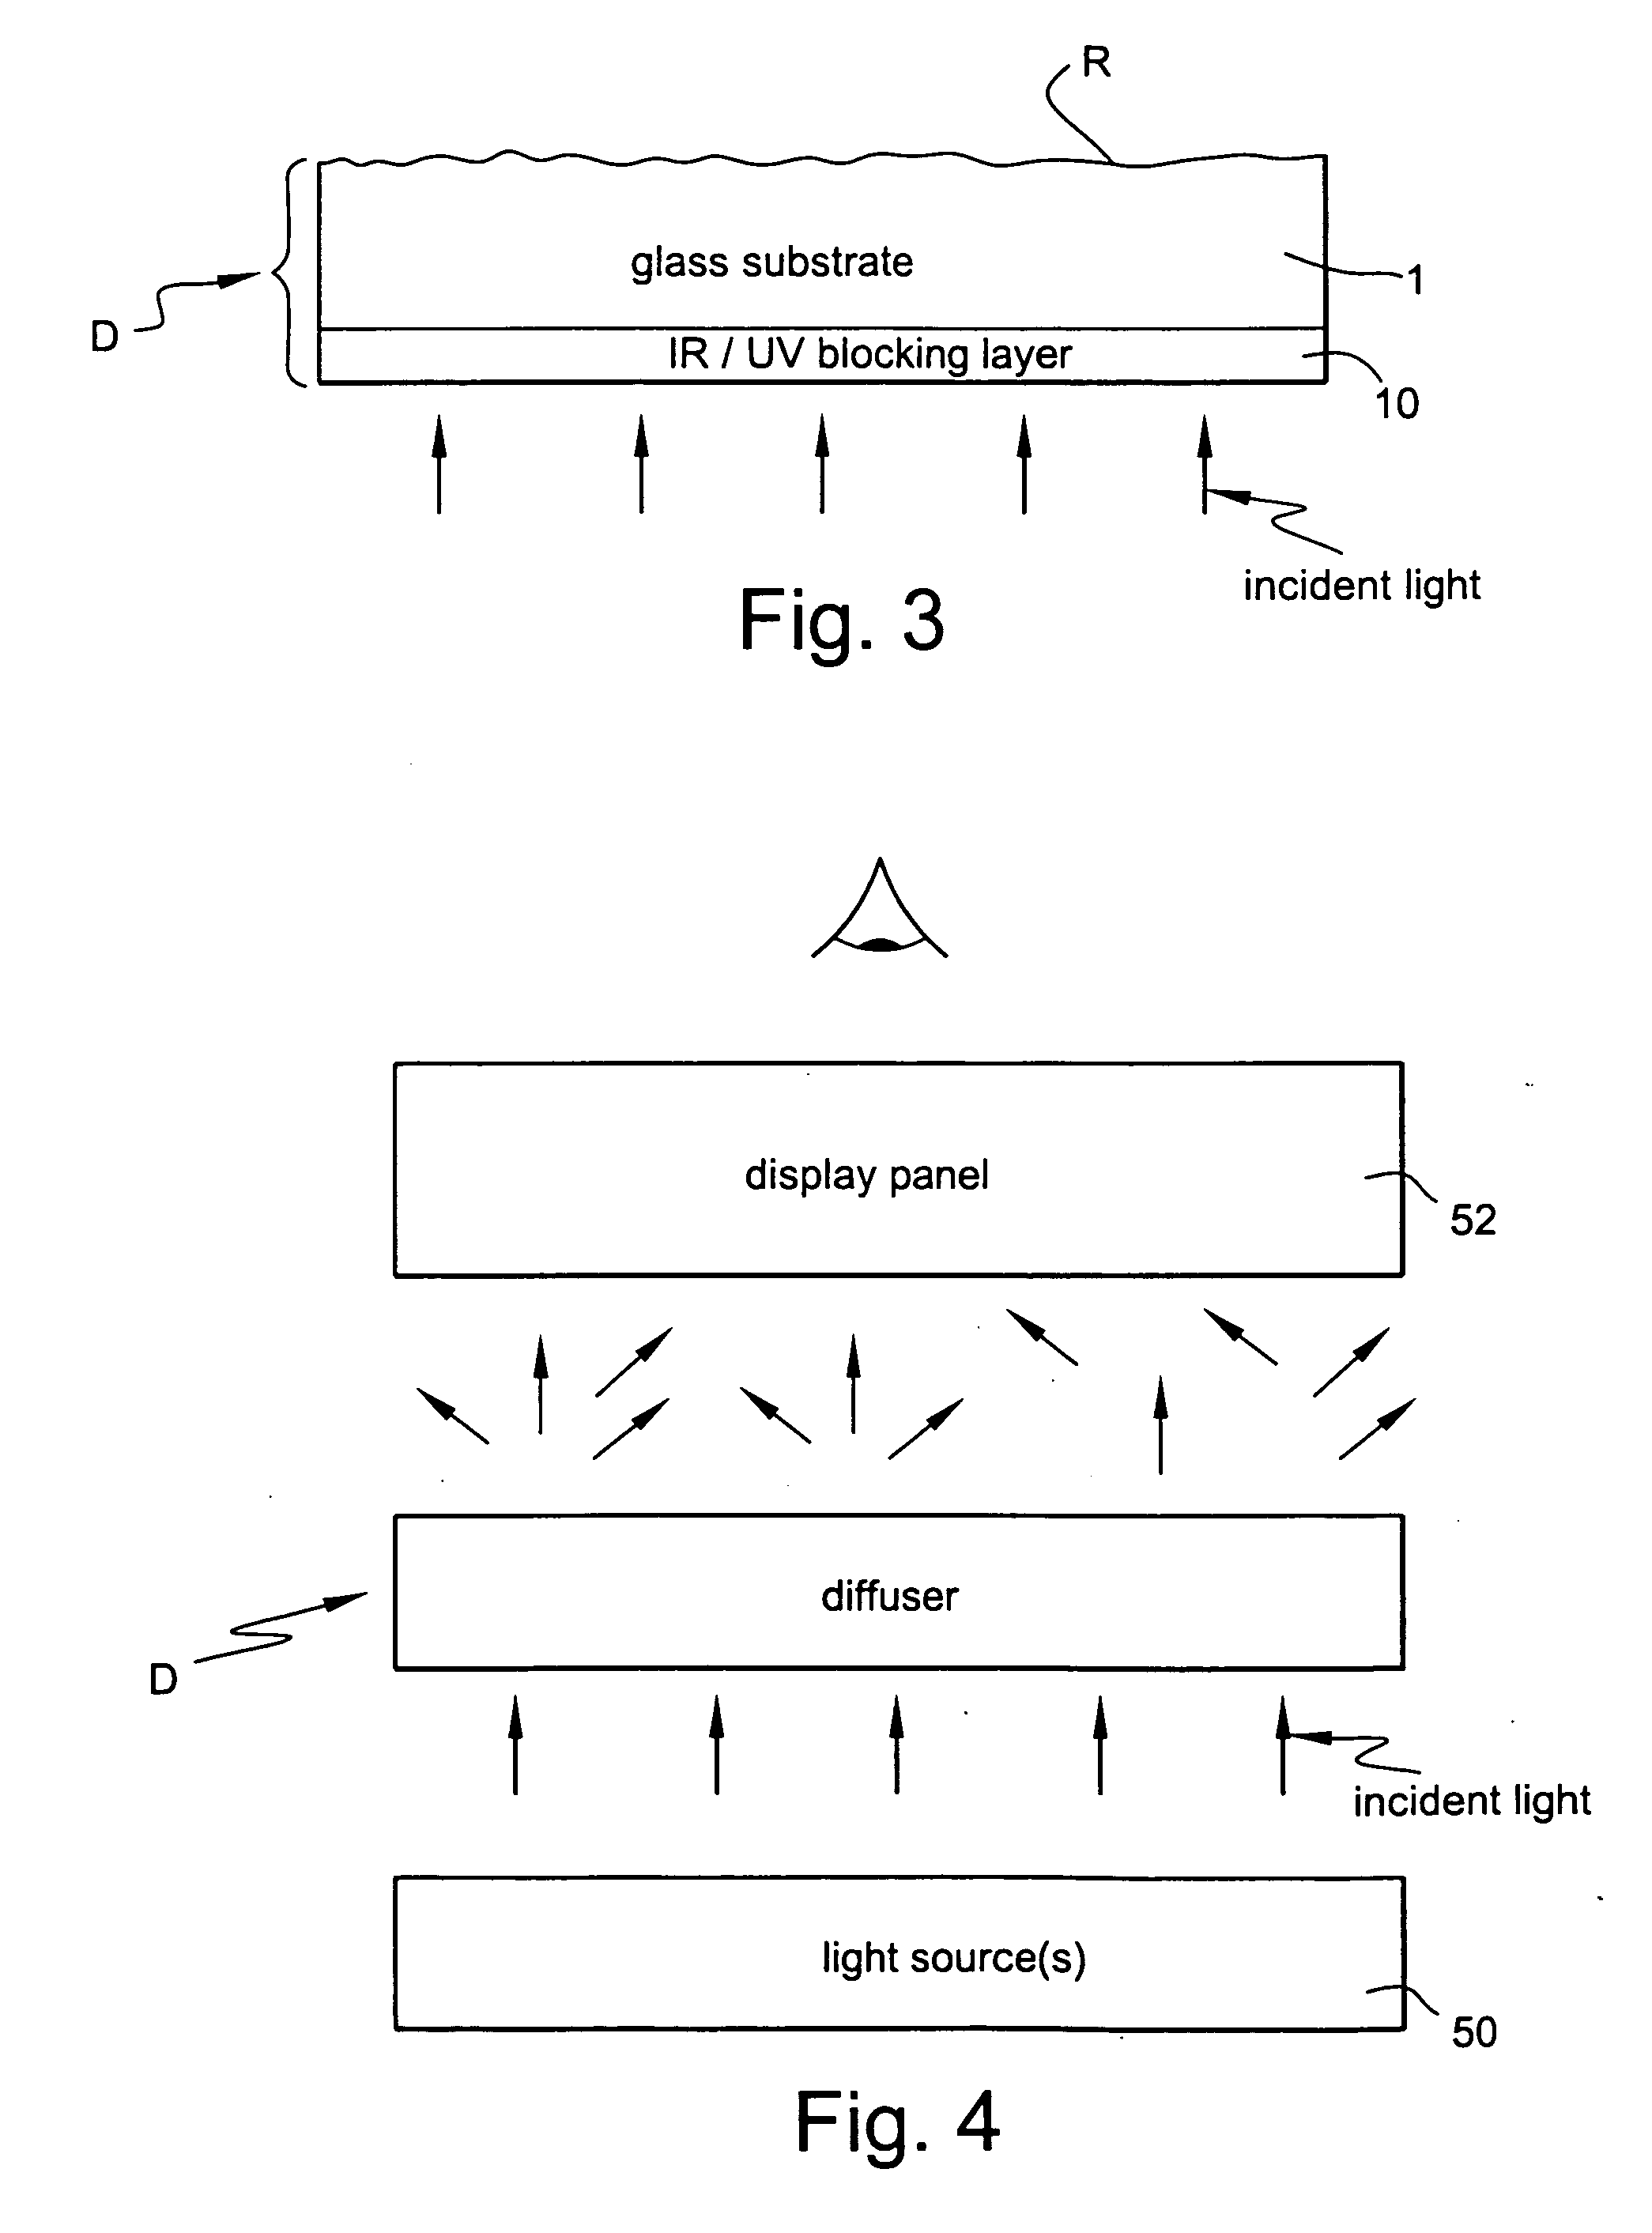 Optical diffuser with IR and/or UV blocking coating